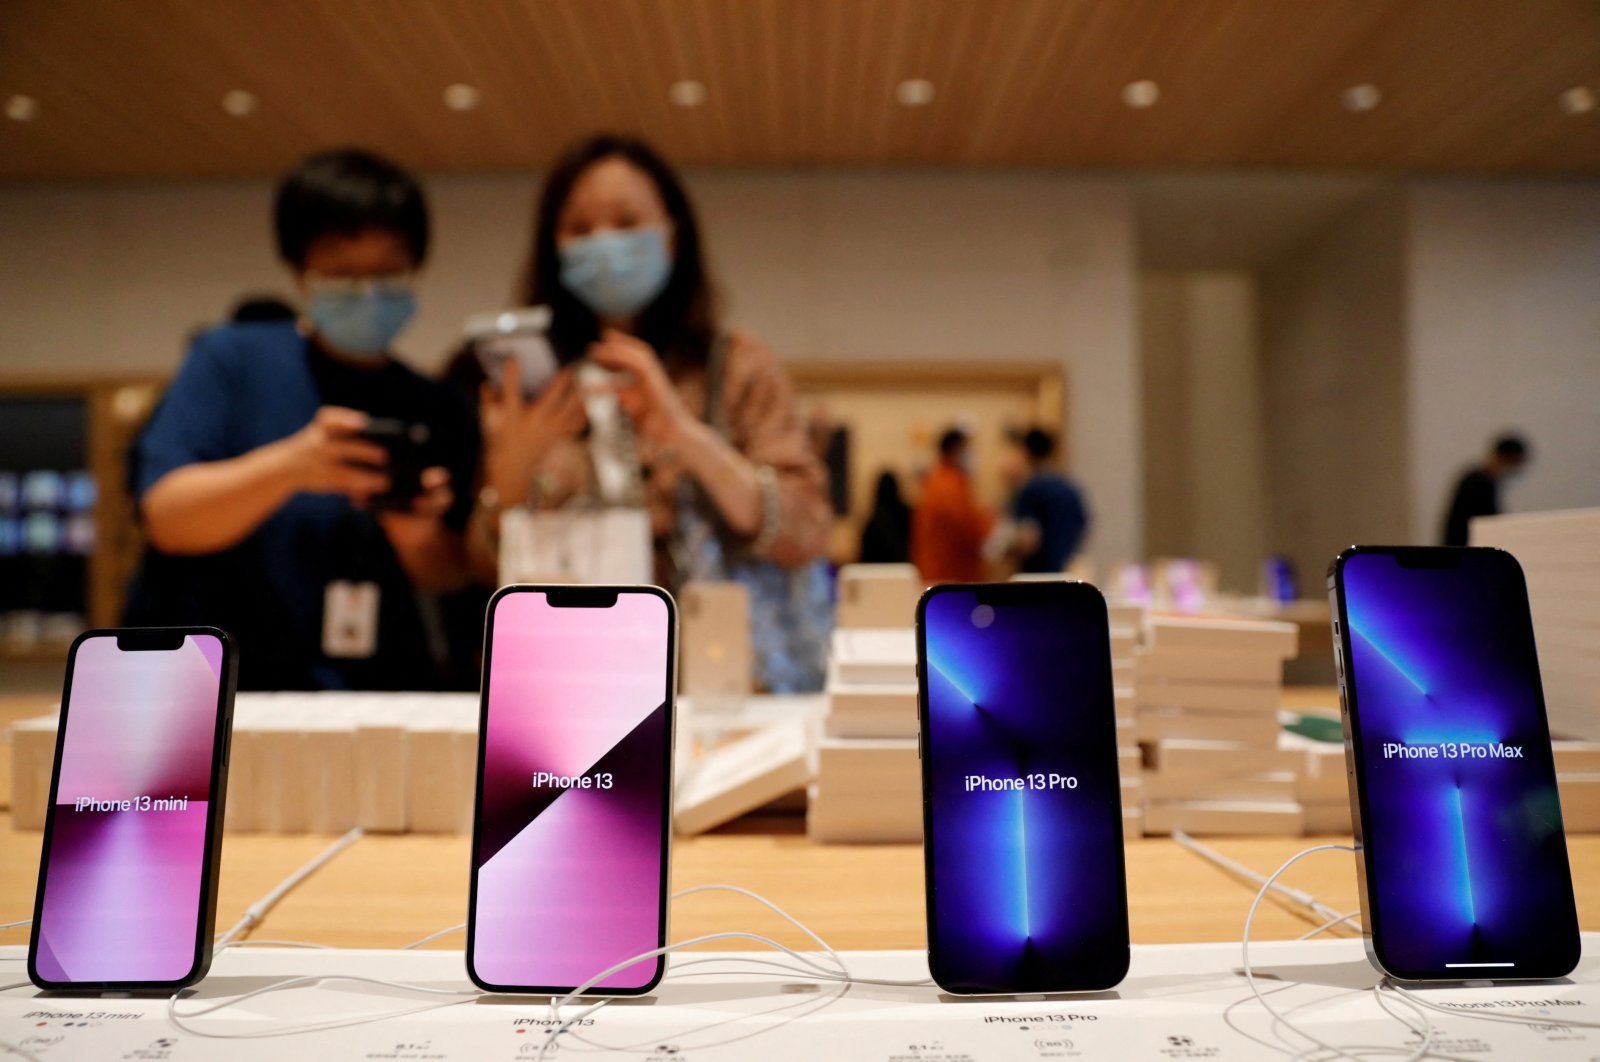 Apple iPhone 13 are pictured at an Apple Store on the day the new Apple iPhone 13 series goes on sale, in Beijing, China, Sept. 24, 2021. (Reuters Photo)